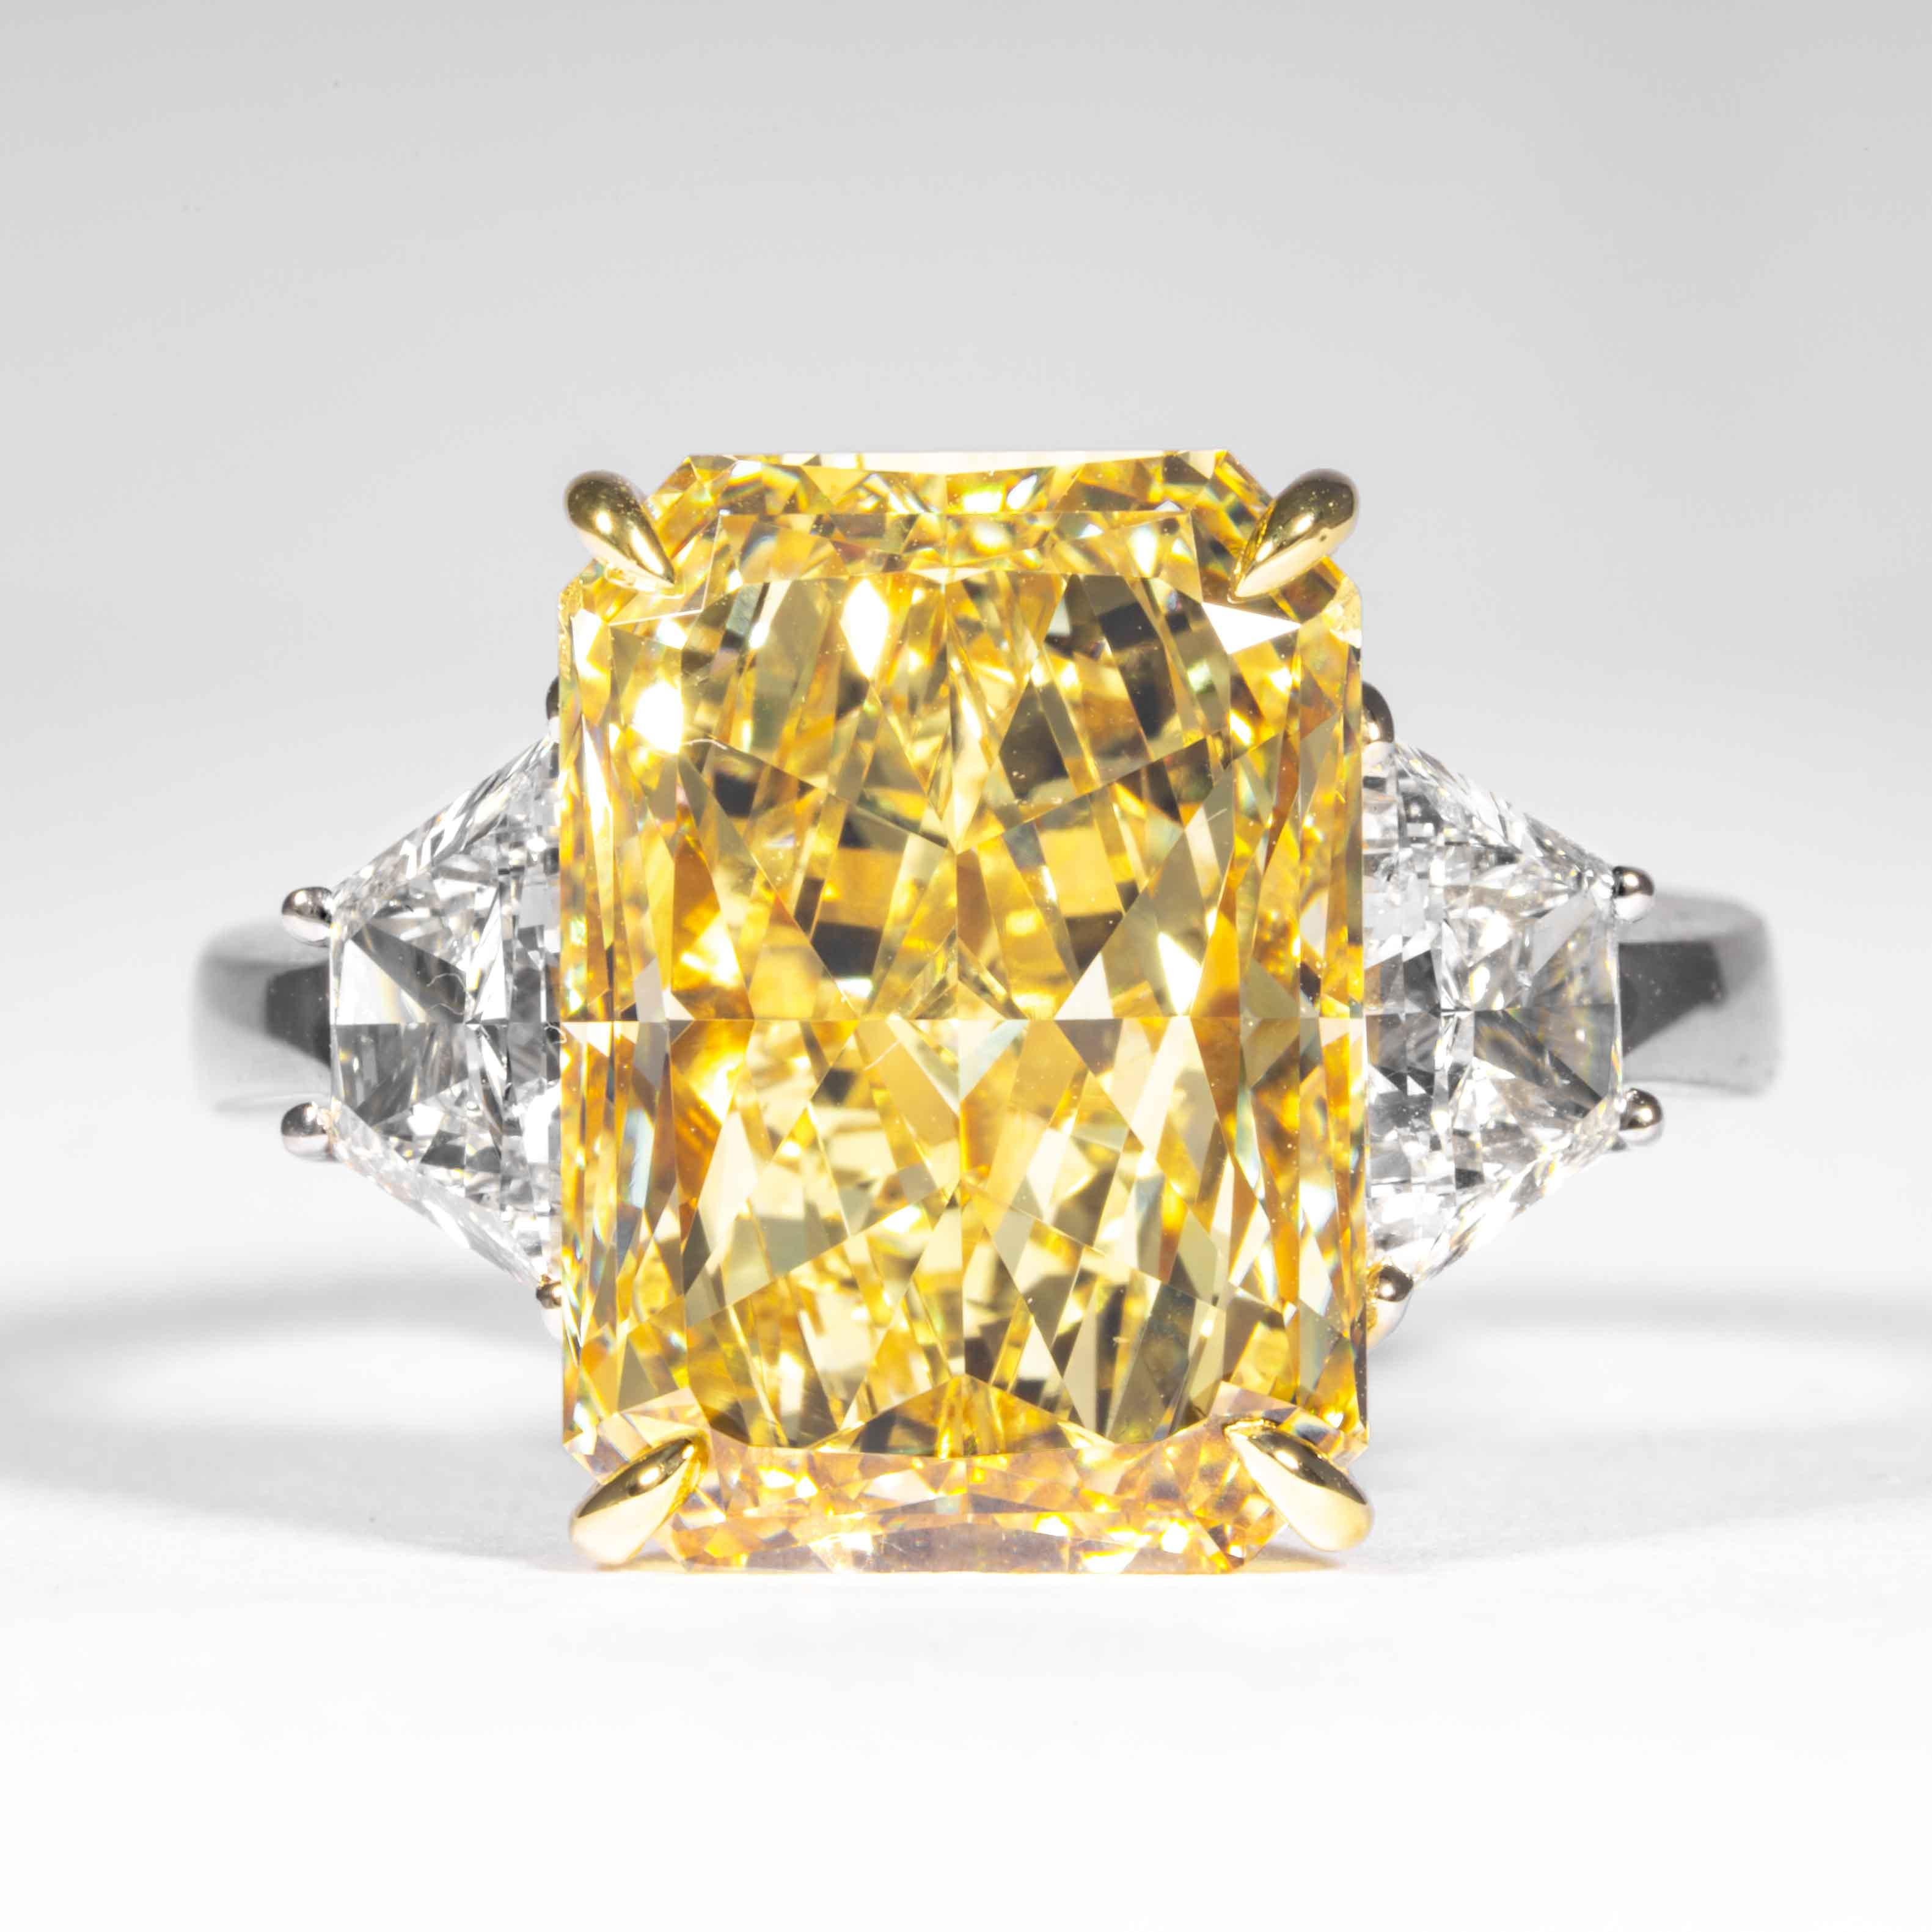 This fancy yellow elongated radiant cut diamond is offered by Shreve, Crump & Low.  This fancy yellow radiant cut diamond is custom set in a handcrafted Shreve, Crump & Low platinum and 18 karat yellow gold 3 stone ring consisting of 1 radiant cut